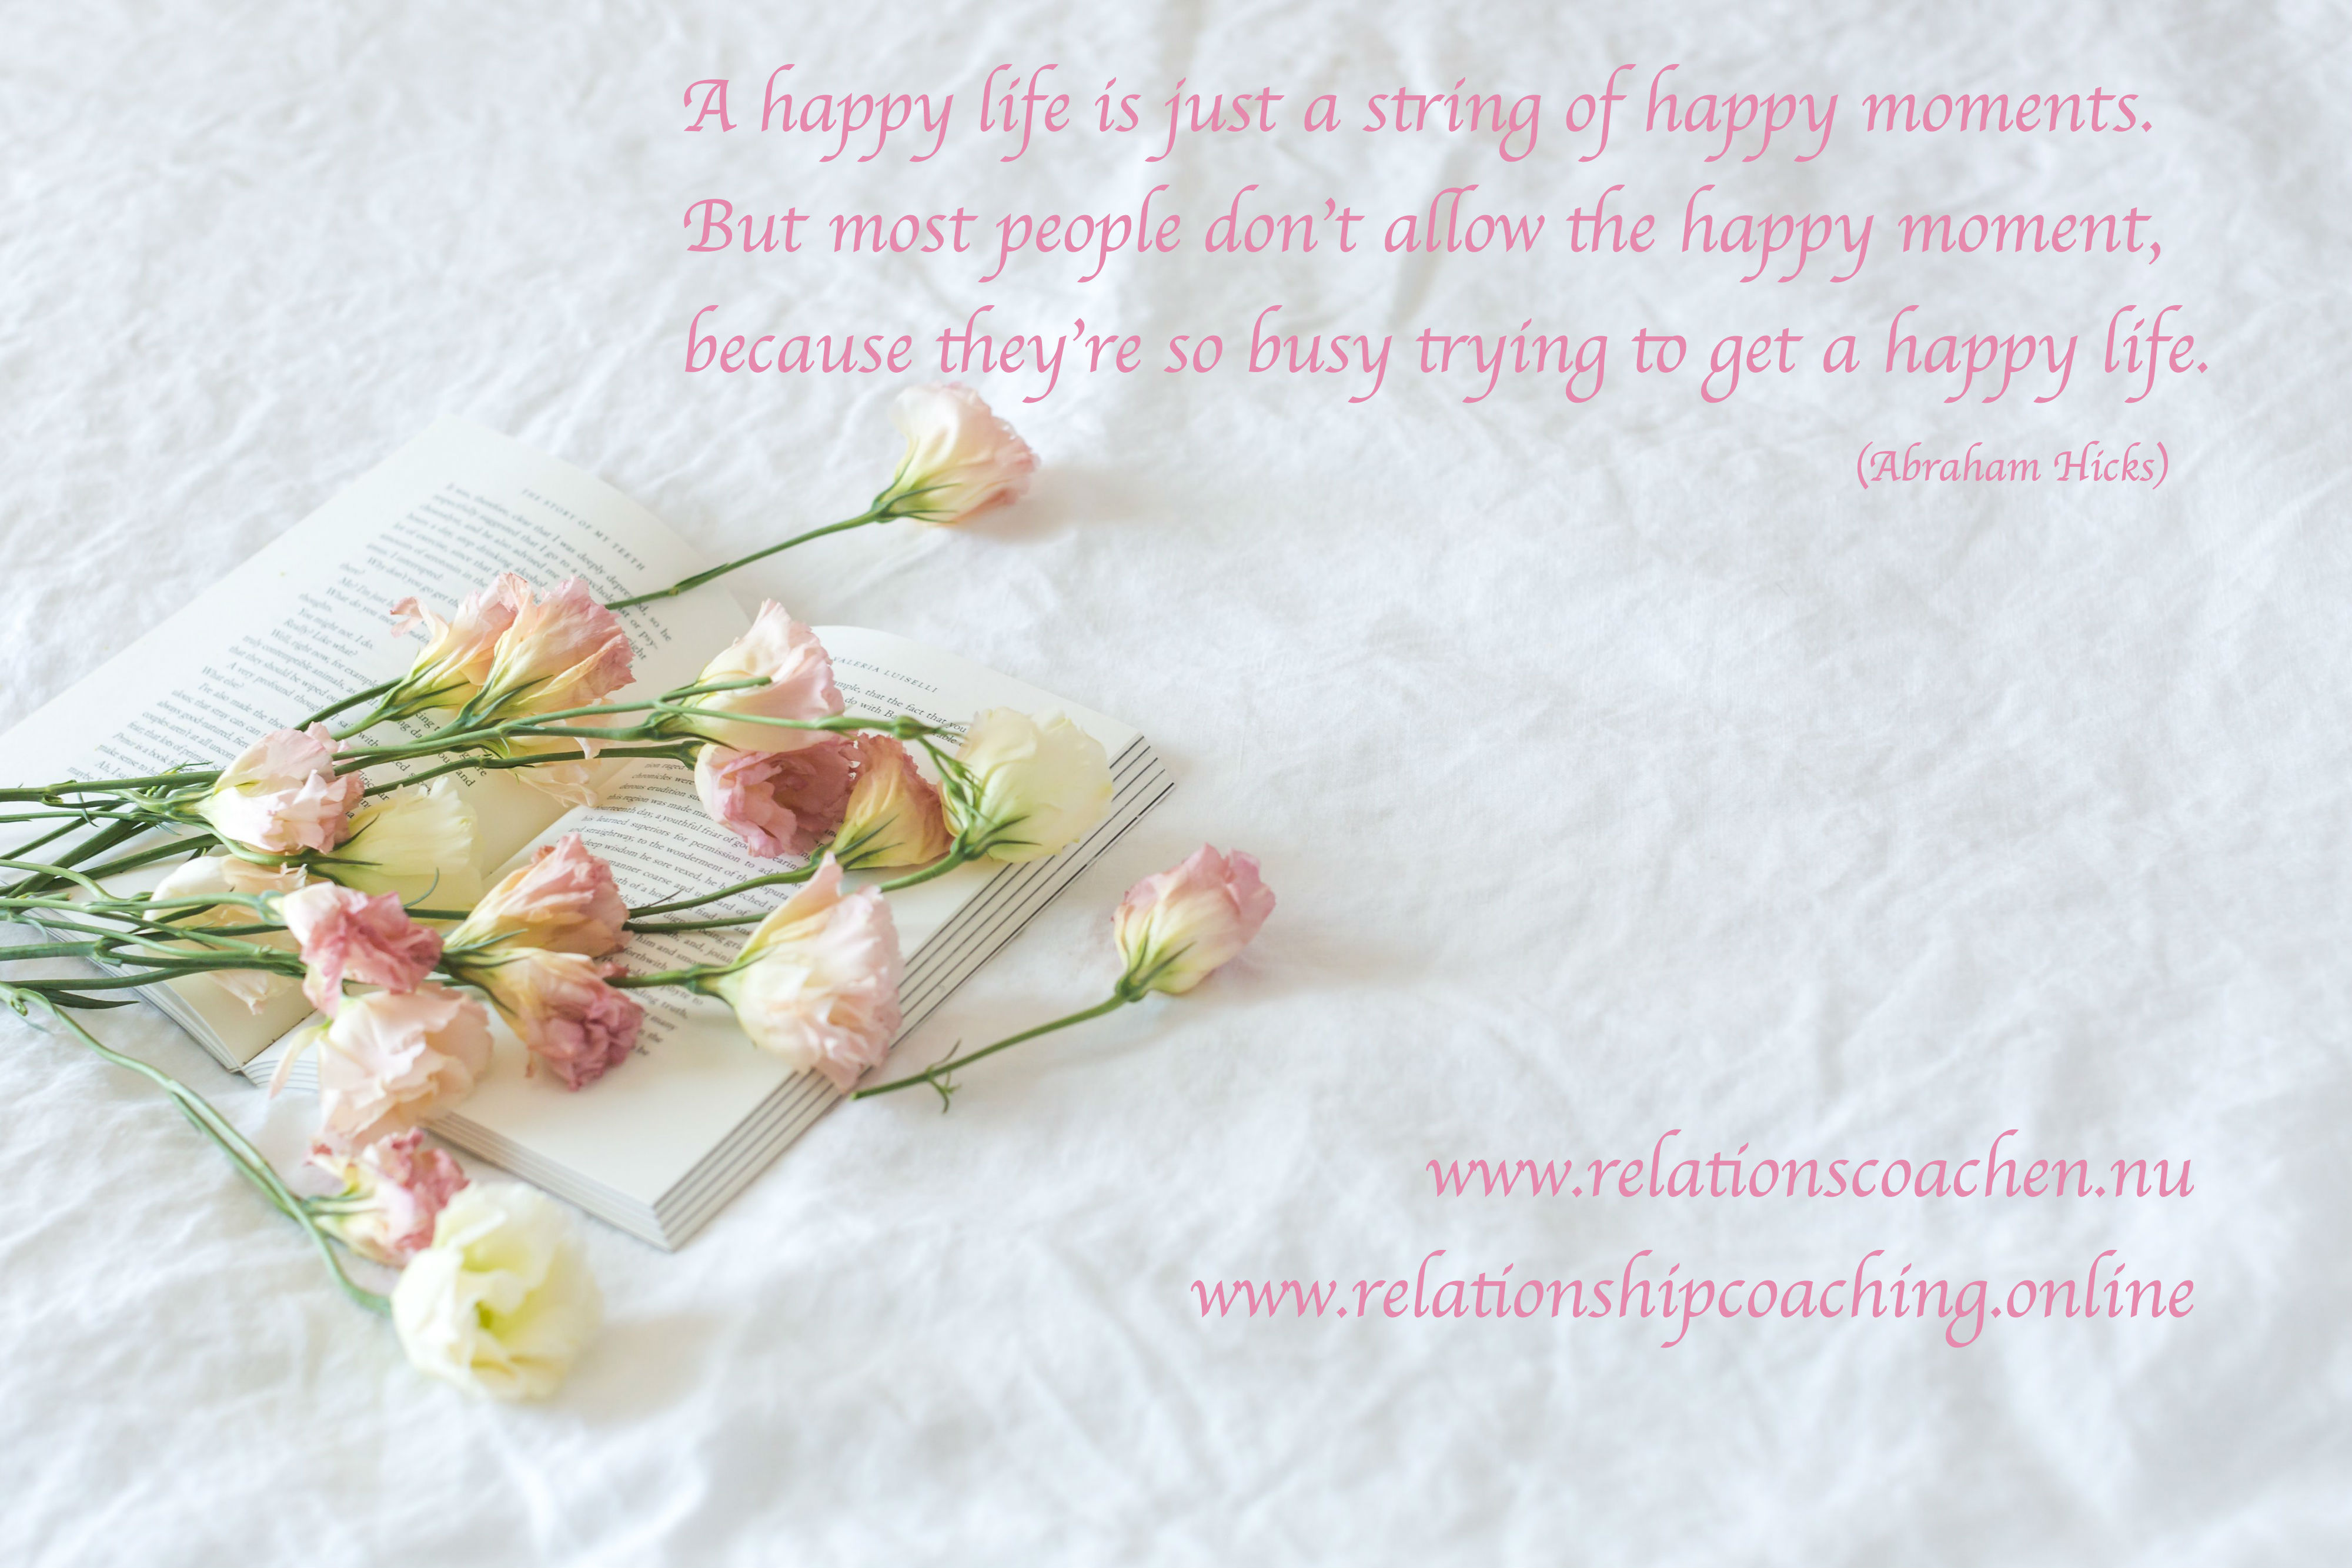 A happy life is just a string of happy moments